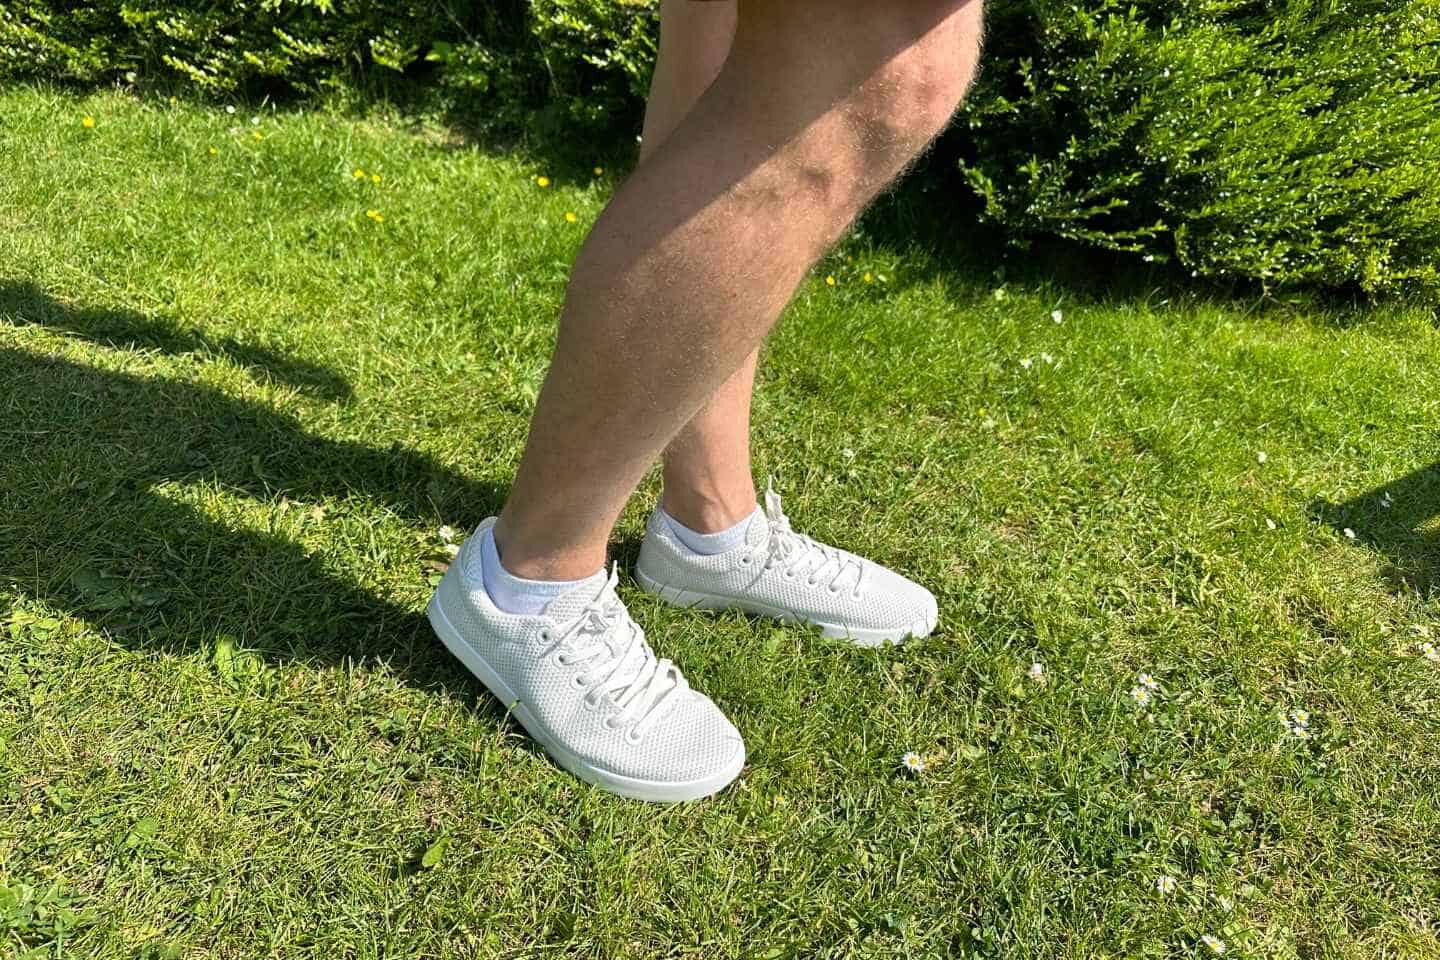 Tom in Allbirds Tree Pipers walking on the grass